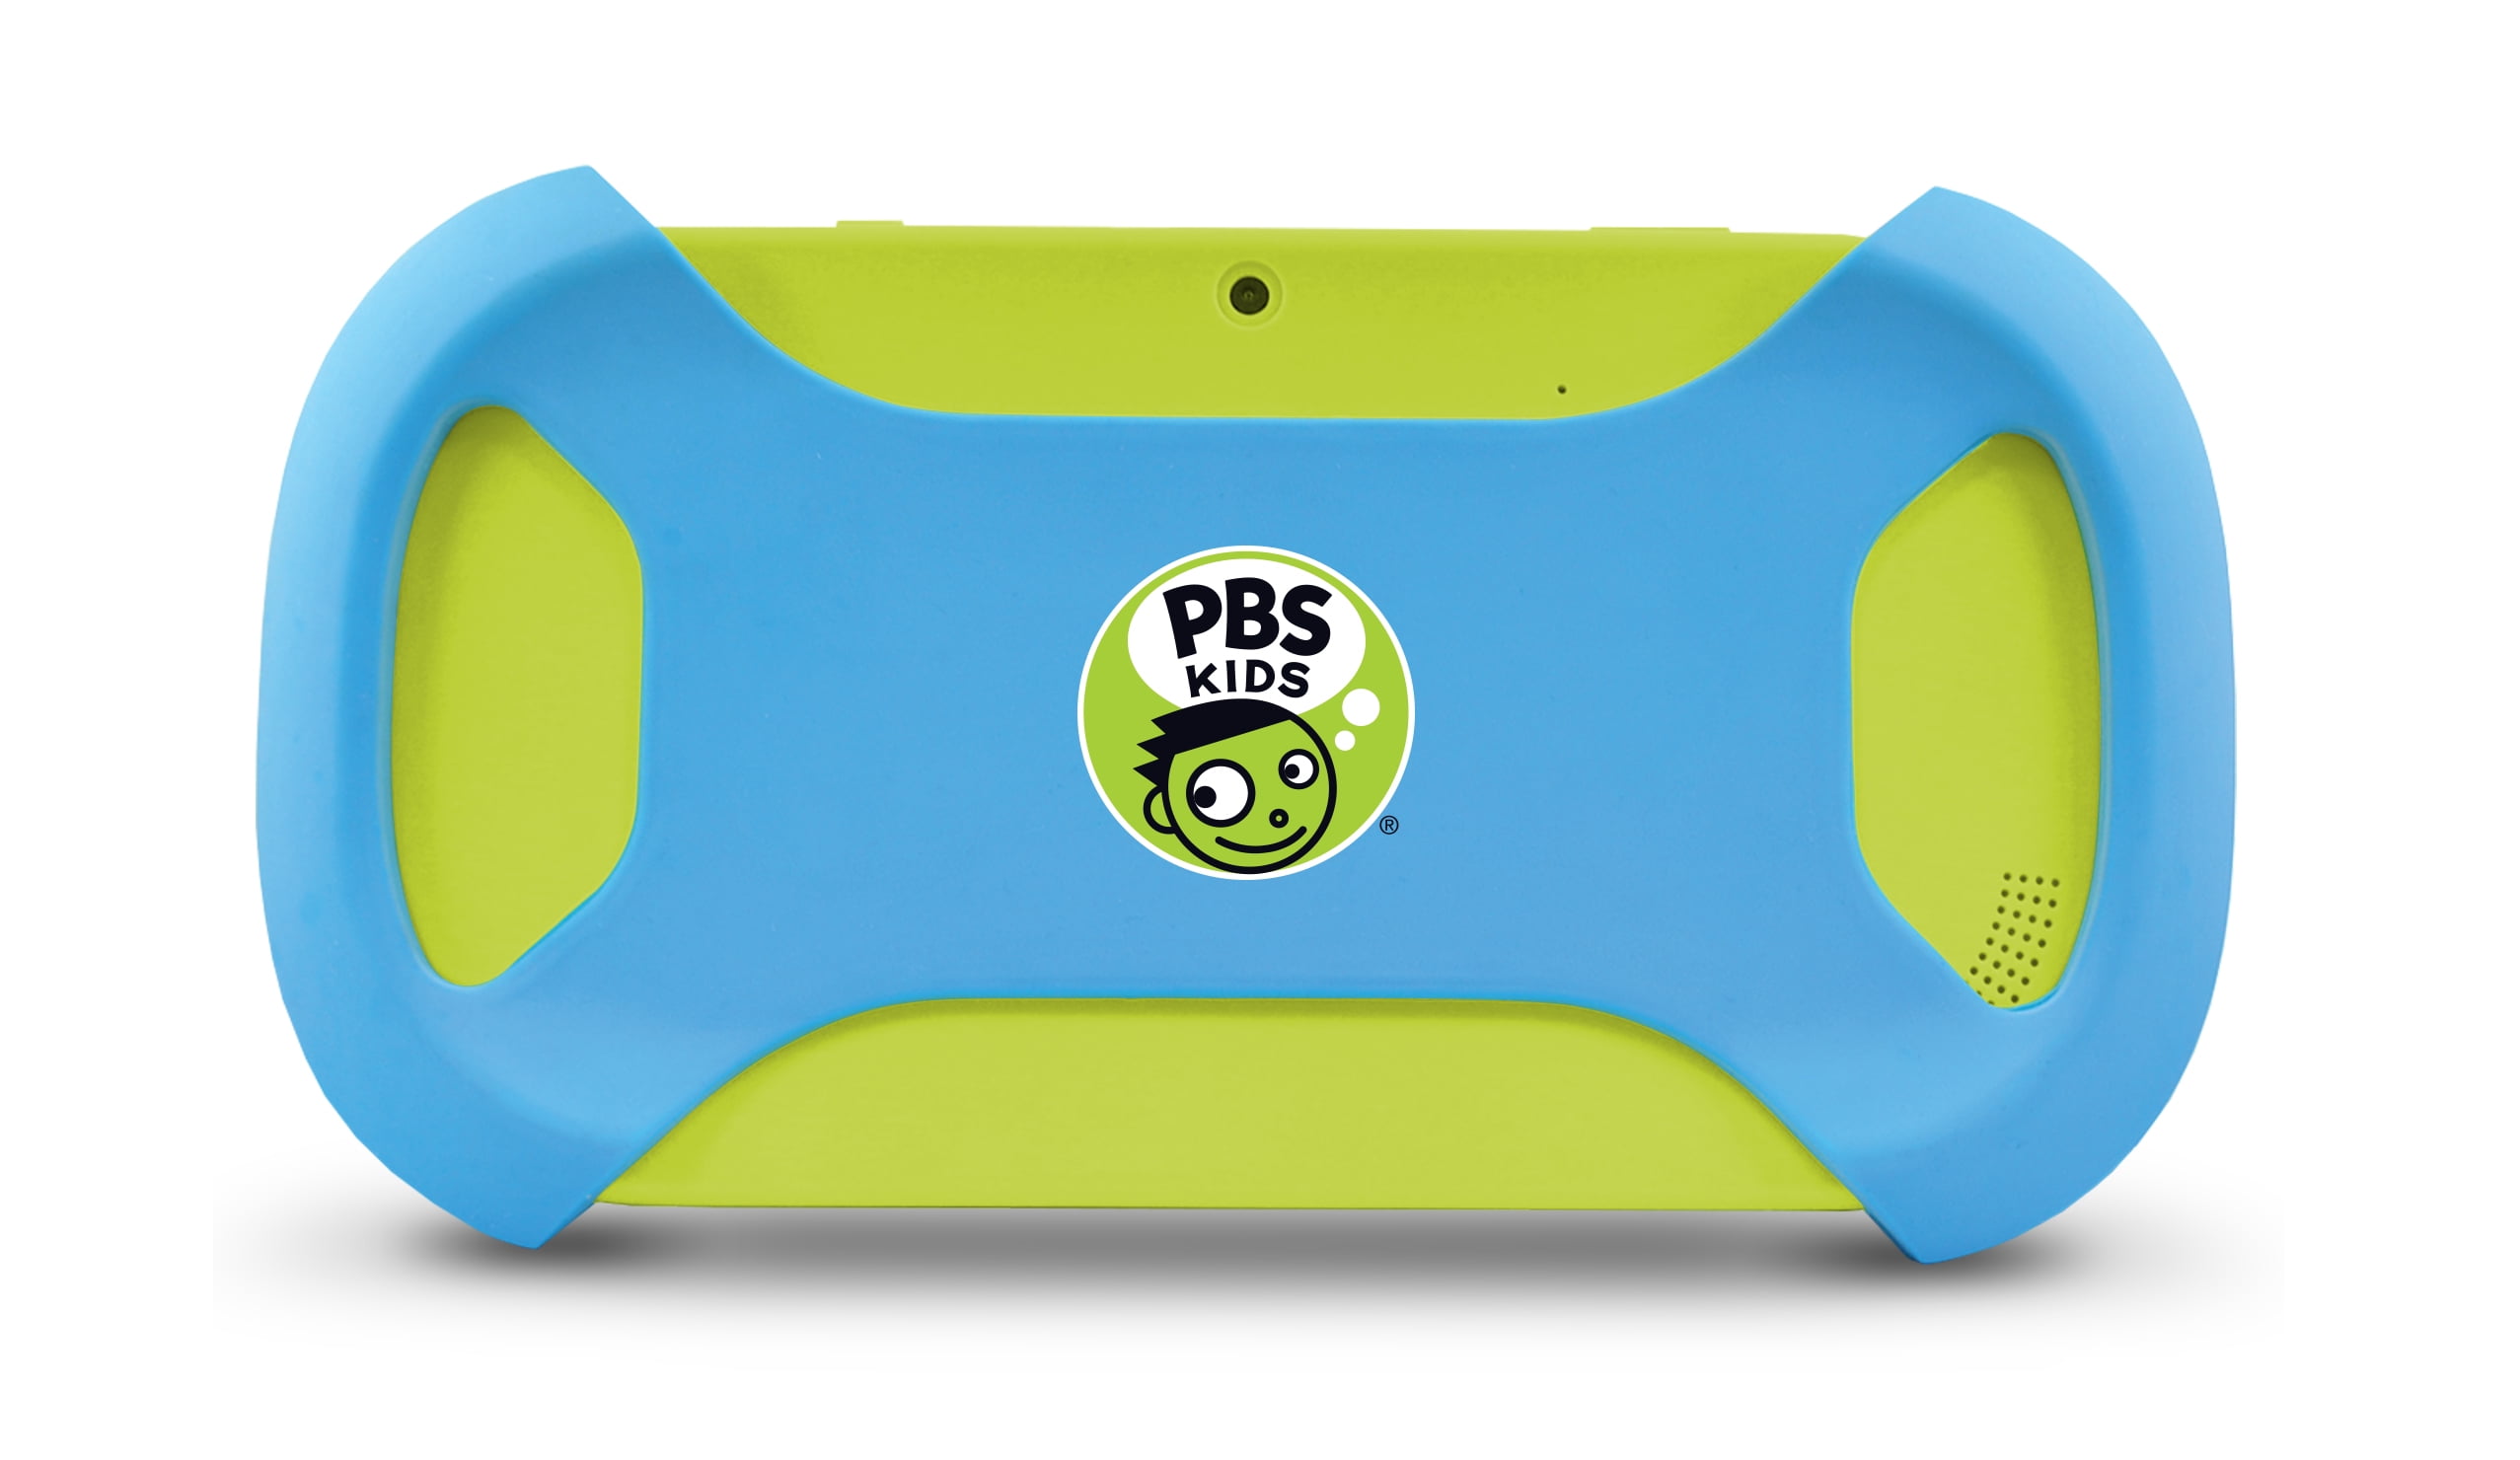 Core Innovations PBS Playtime Pad 7″ Kid Safe Tablet and DVD Player